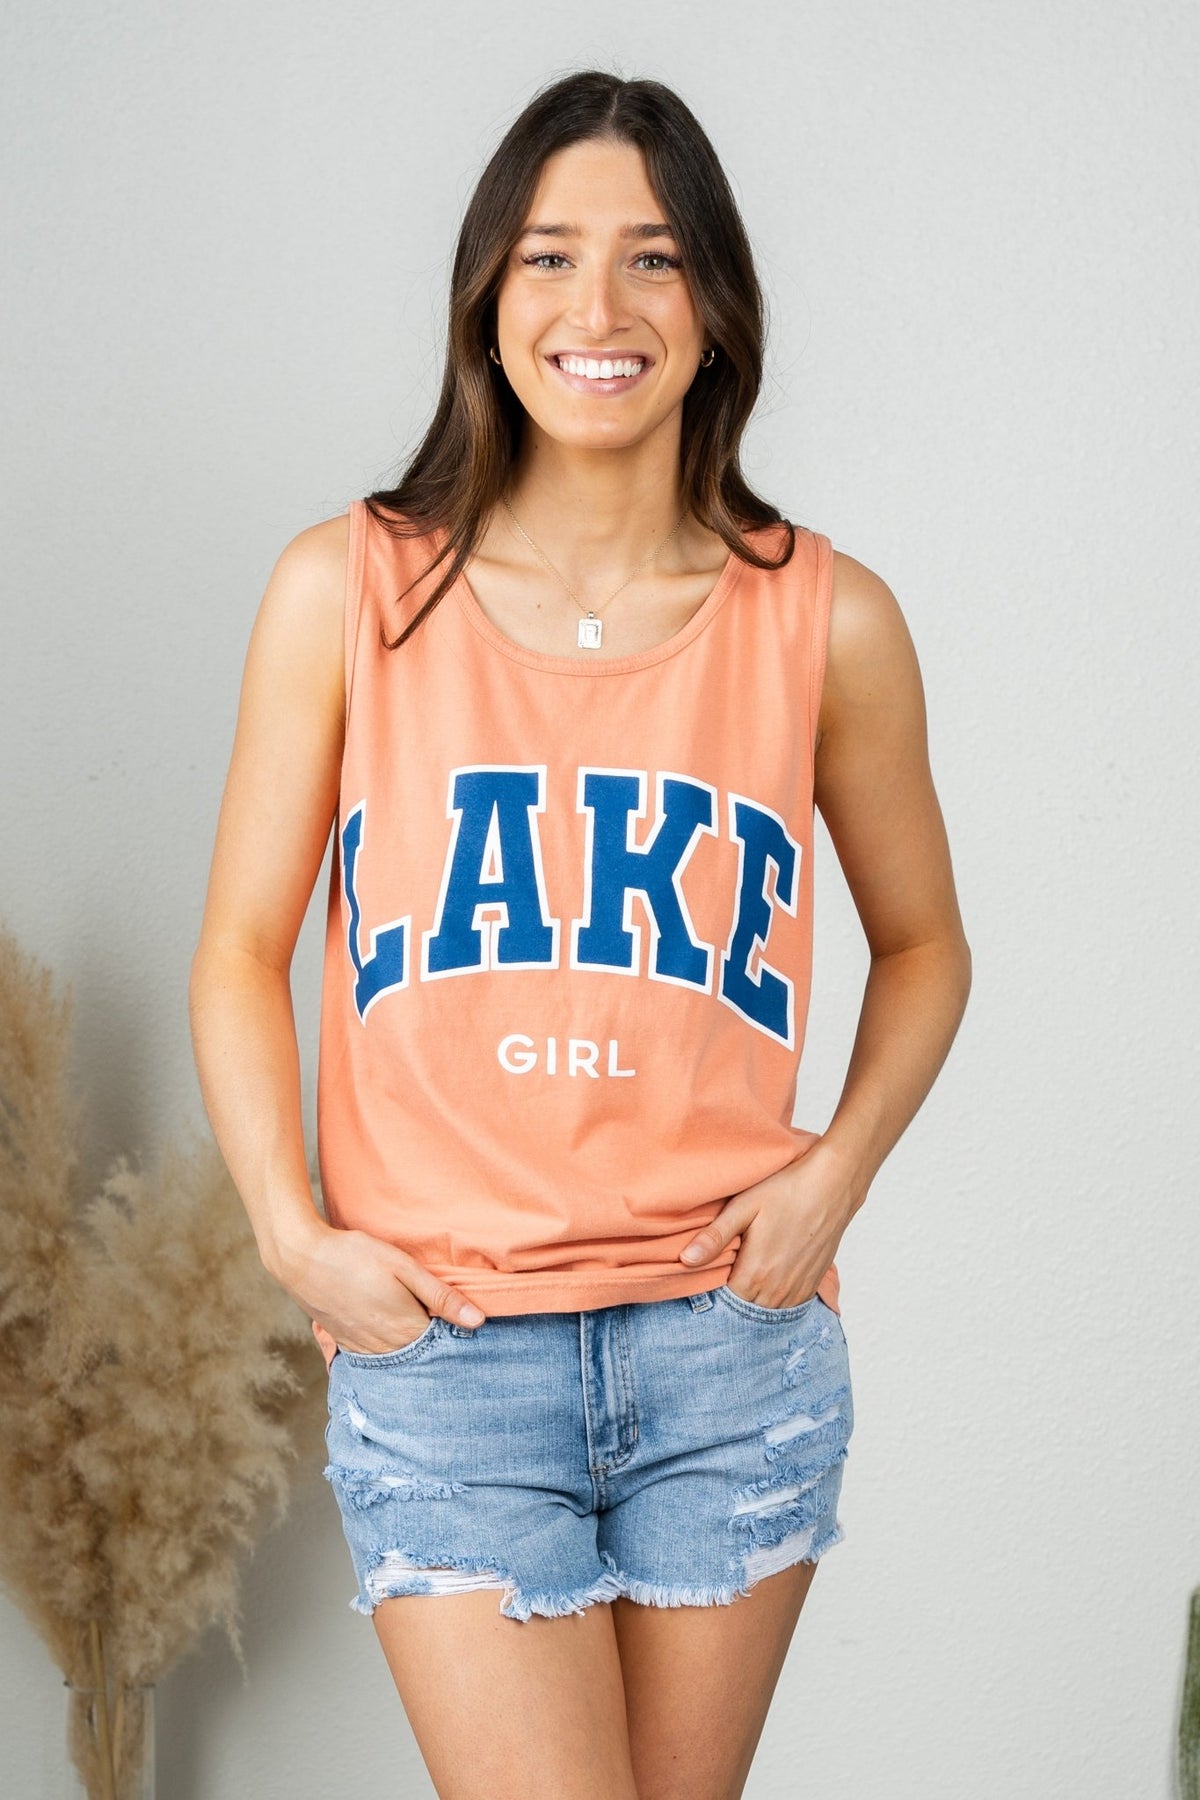 Lake girl gault comfort color tank top terra cotta - DayDreamer Graphic Band Tees at Lush Fashion Lounge Trendy Boutique in Oklahoma City